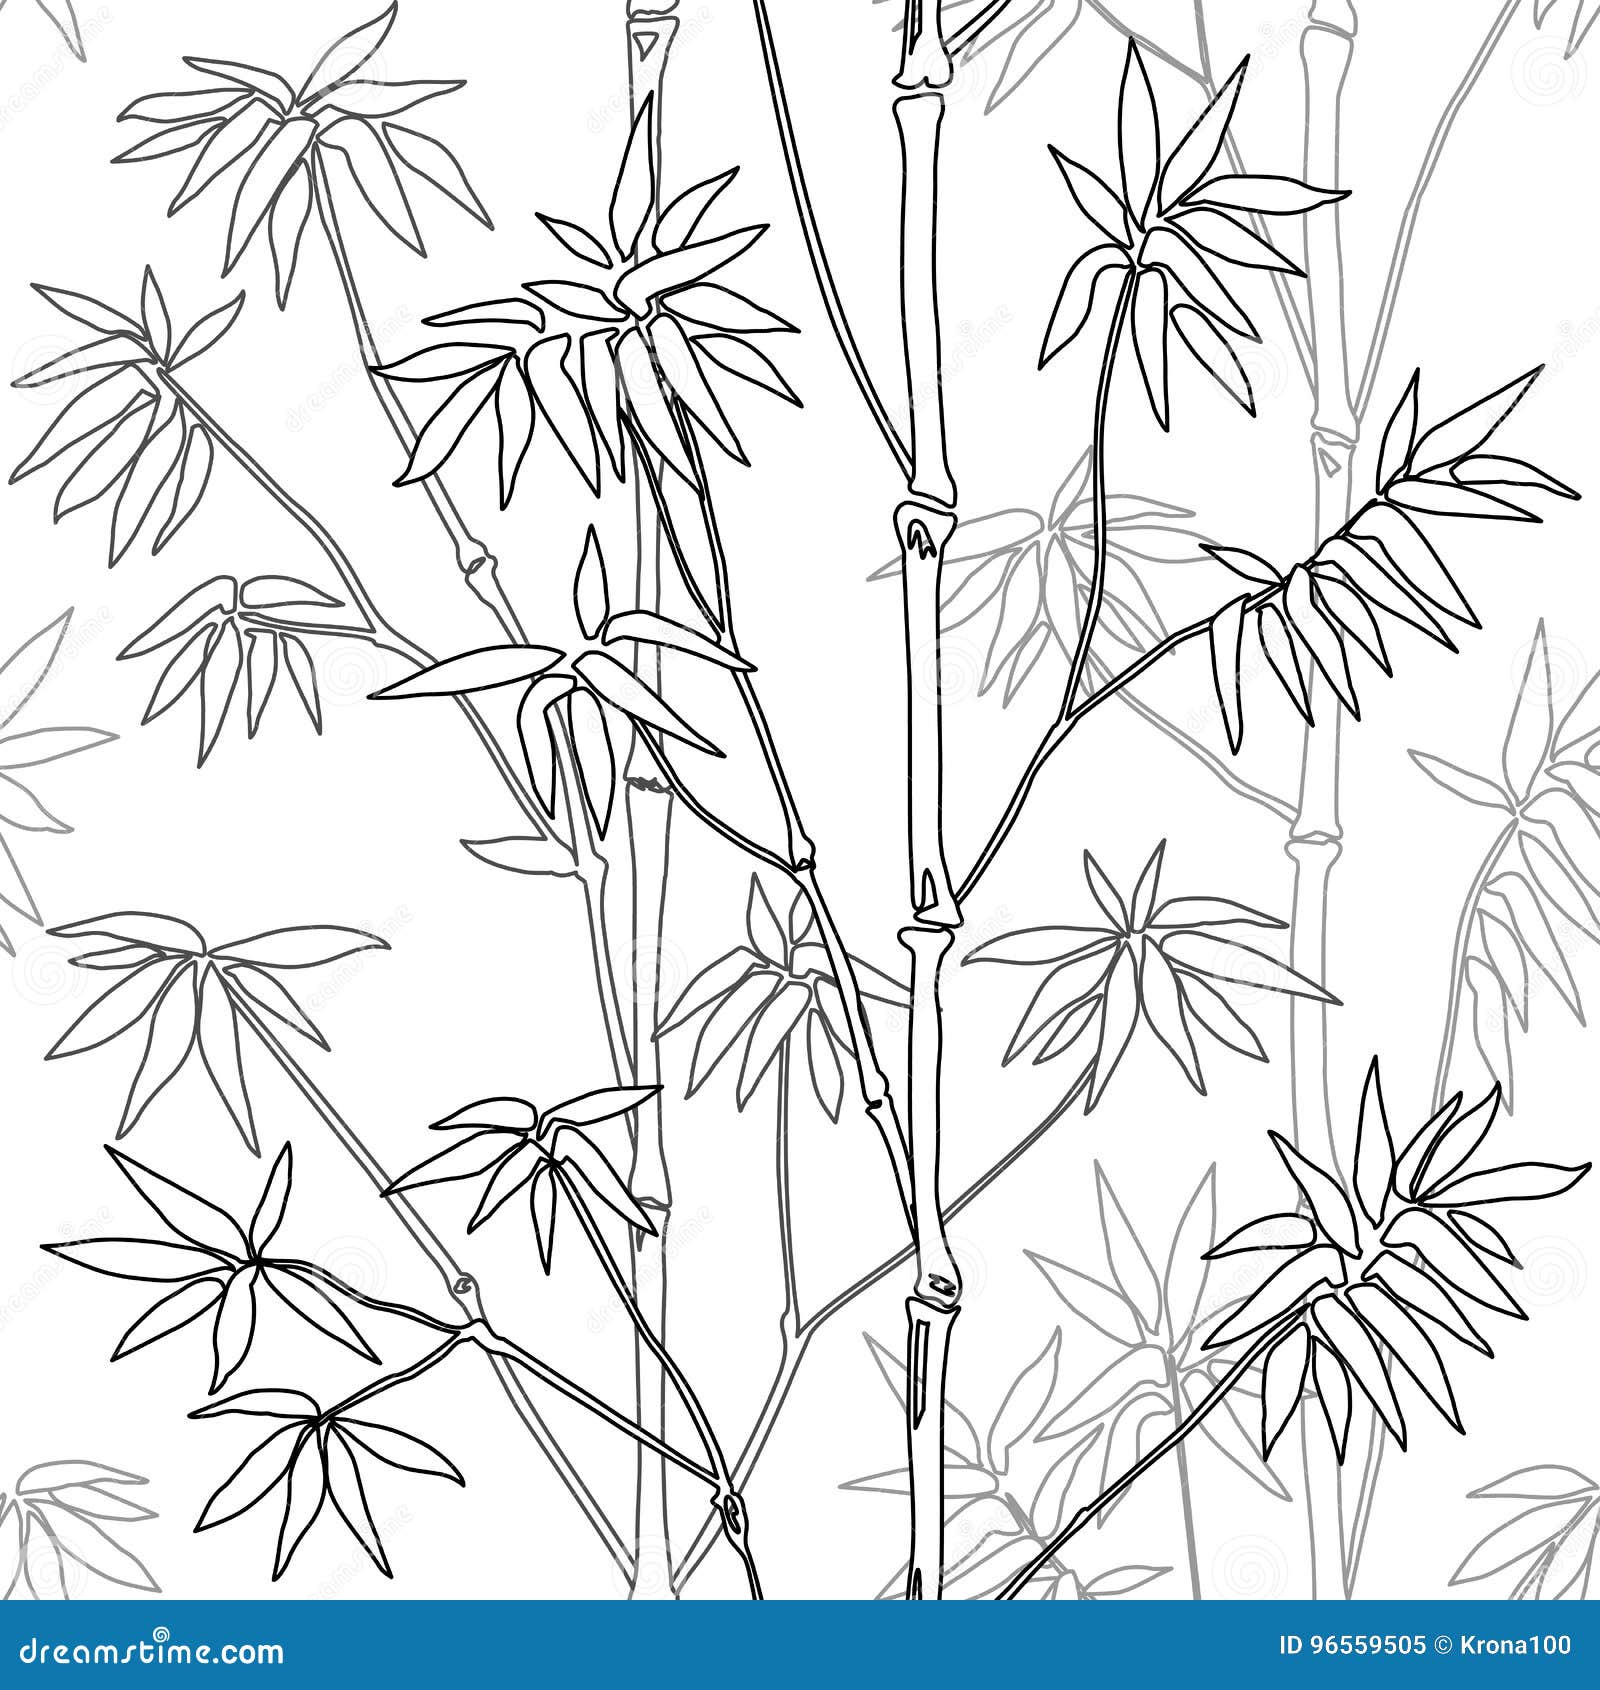 Download Bamboo Seamless Pattern stock vector. Illustration of ...